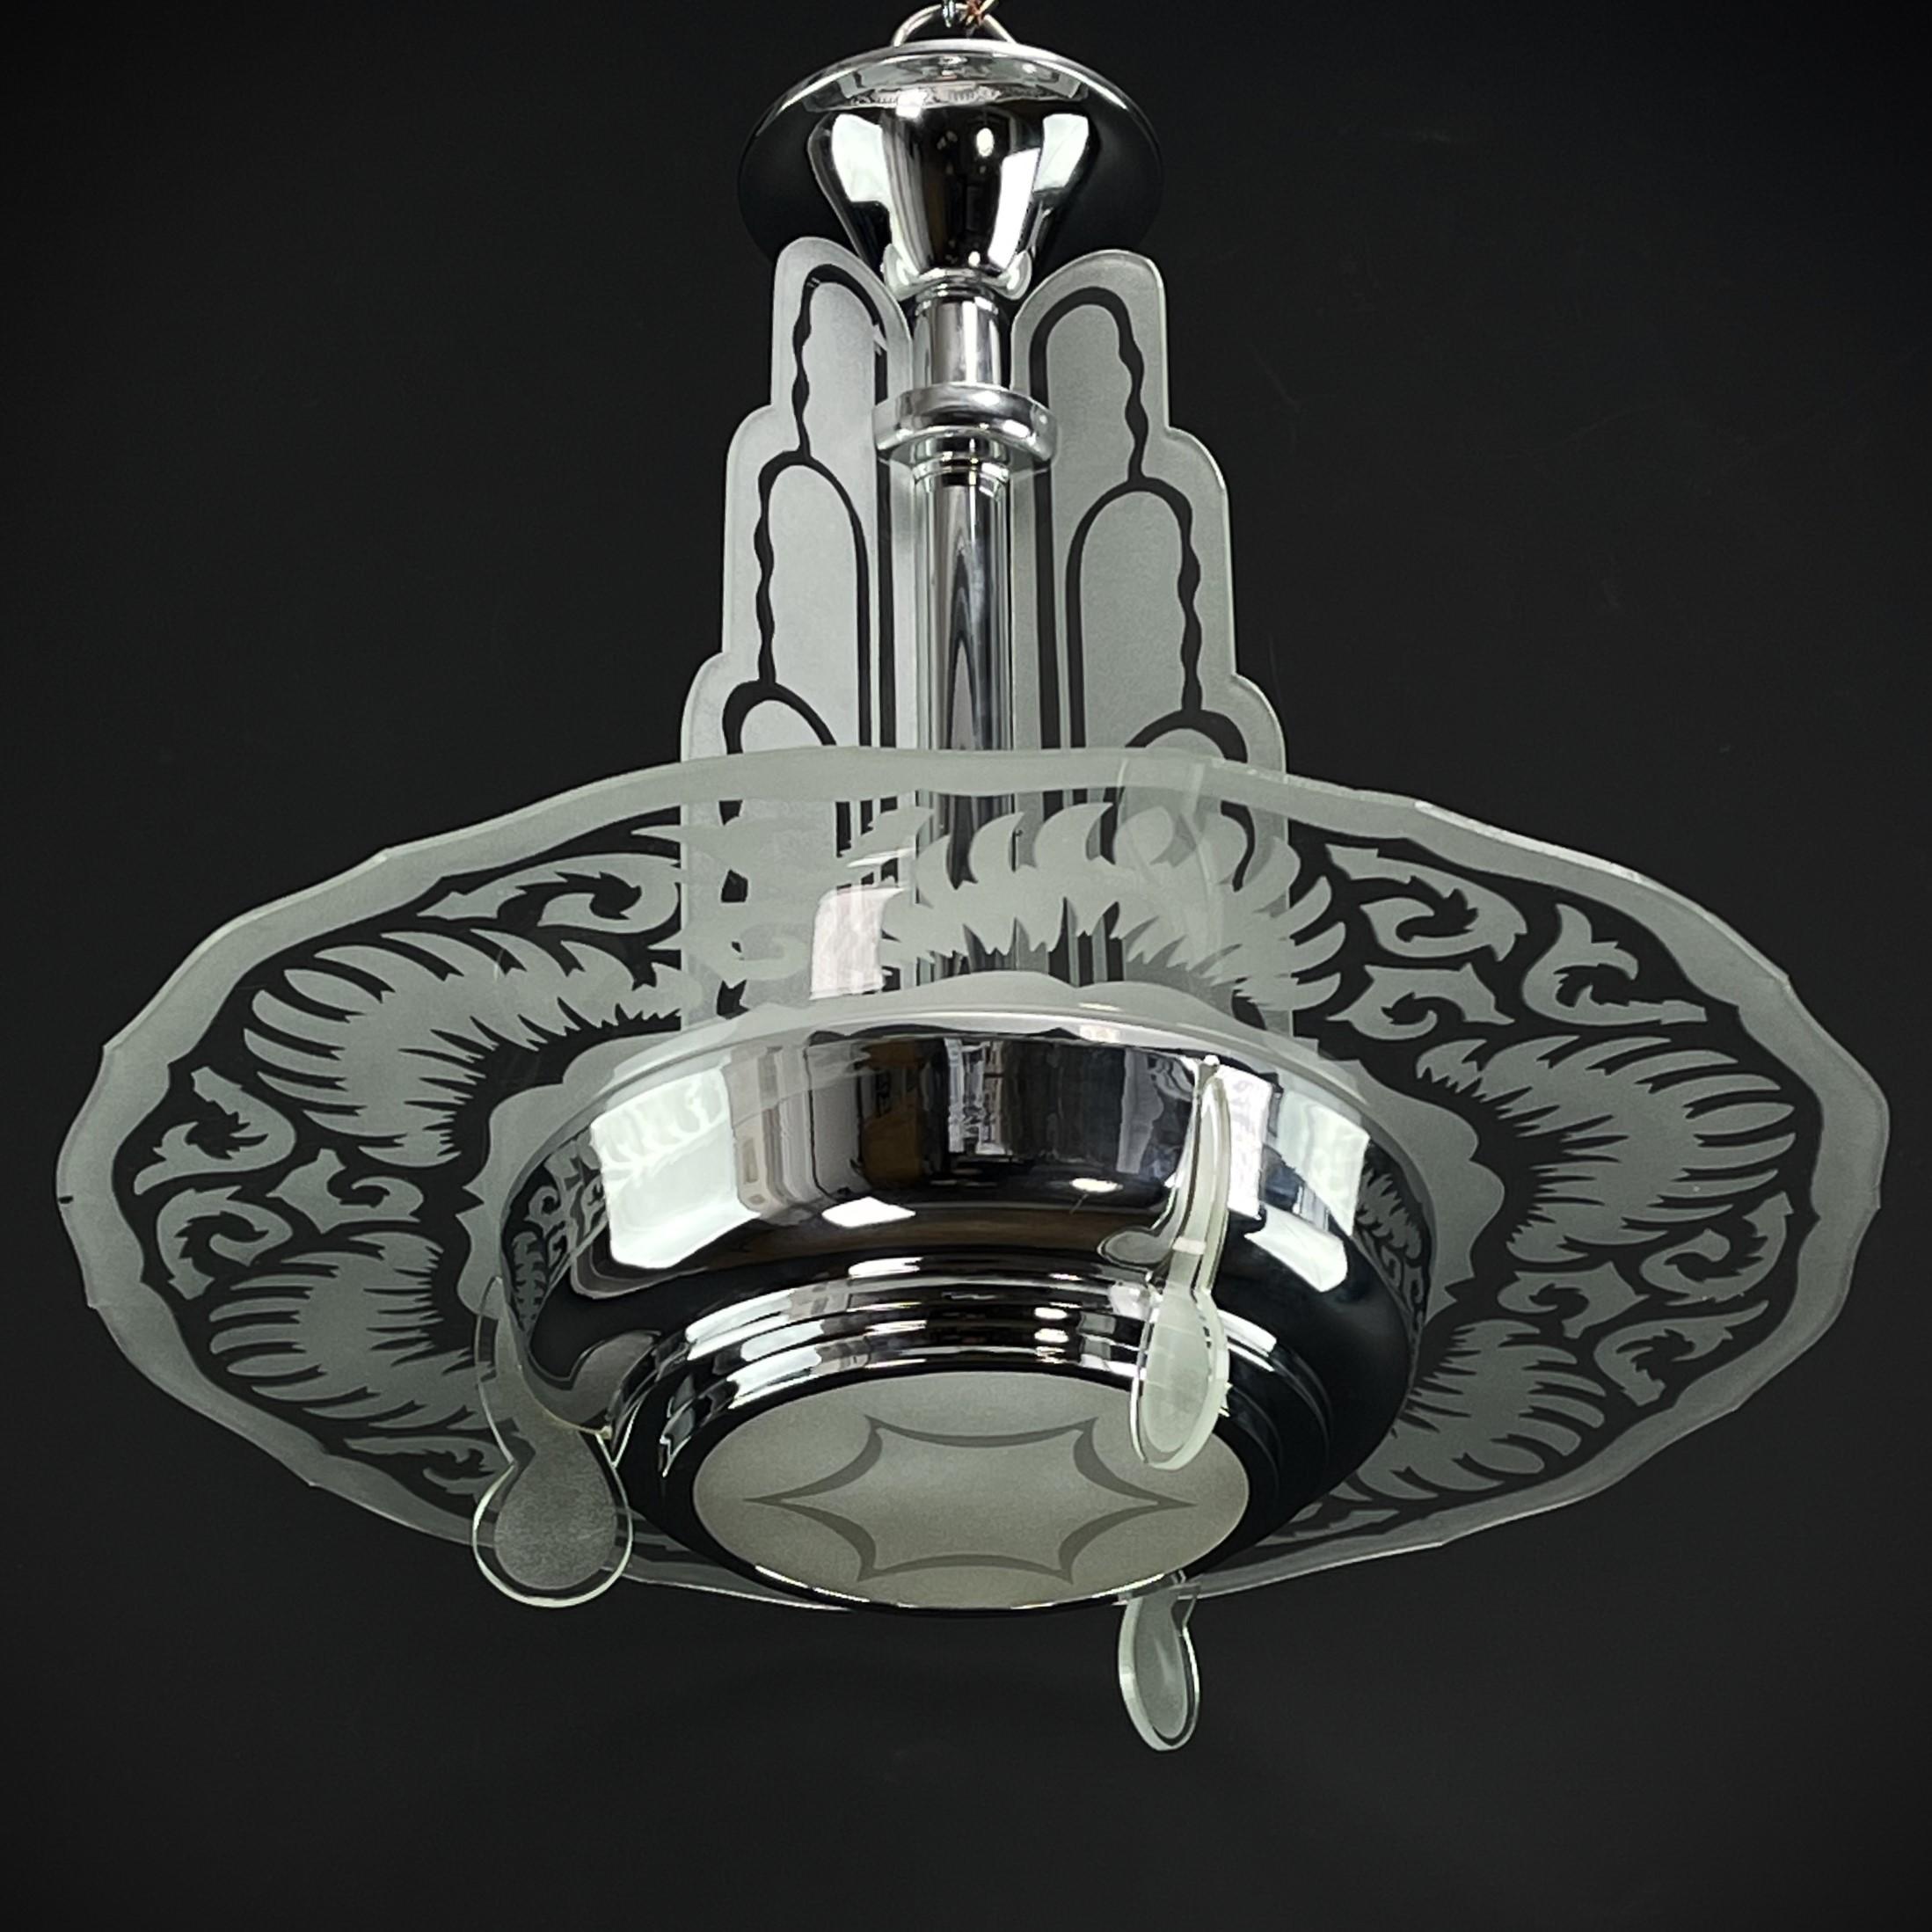 Art Deco chandelier - Waterfall - 1930s

The ART DECO ceiling lamp is a remarkable example of the craftsmanship and style of the early 20th century. 

This masterpiece combines high-quality cut glass and chrome-plated metal, presenting clear lines,